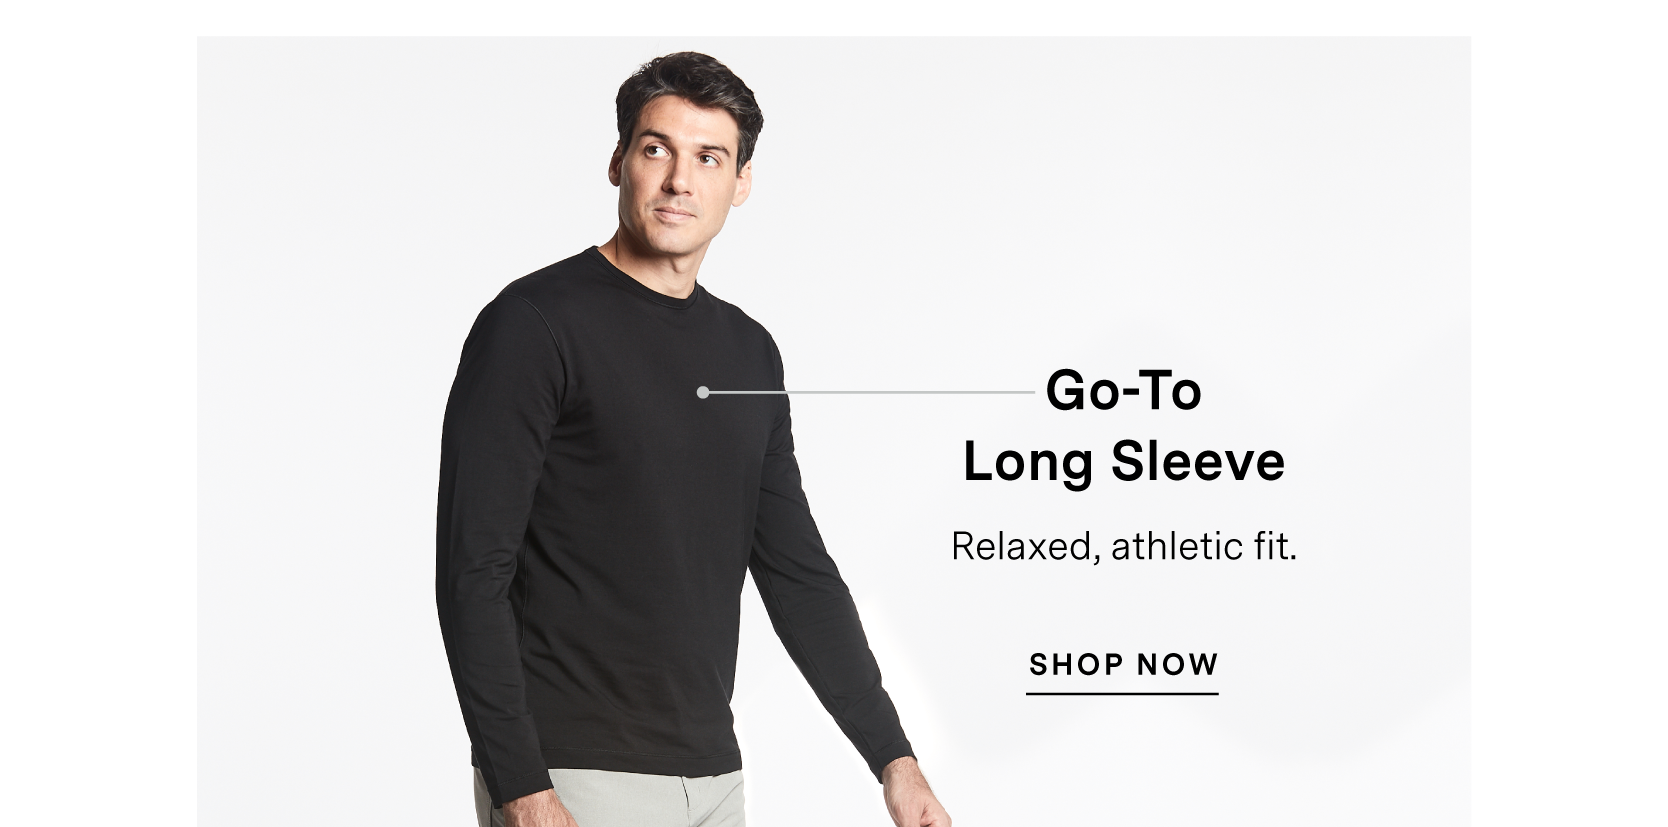 Go-To Long Sleeve. SHOP NOW